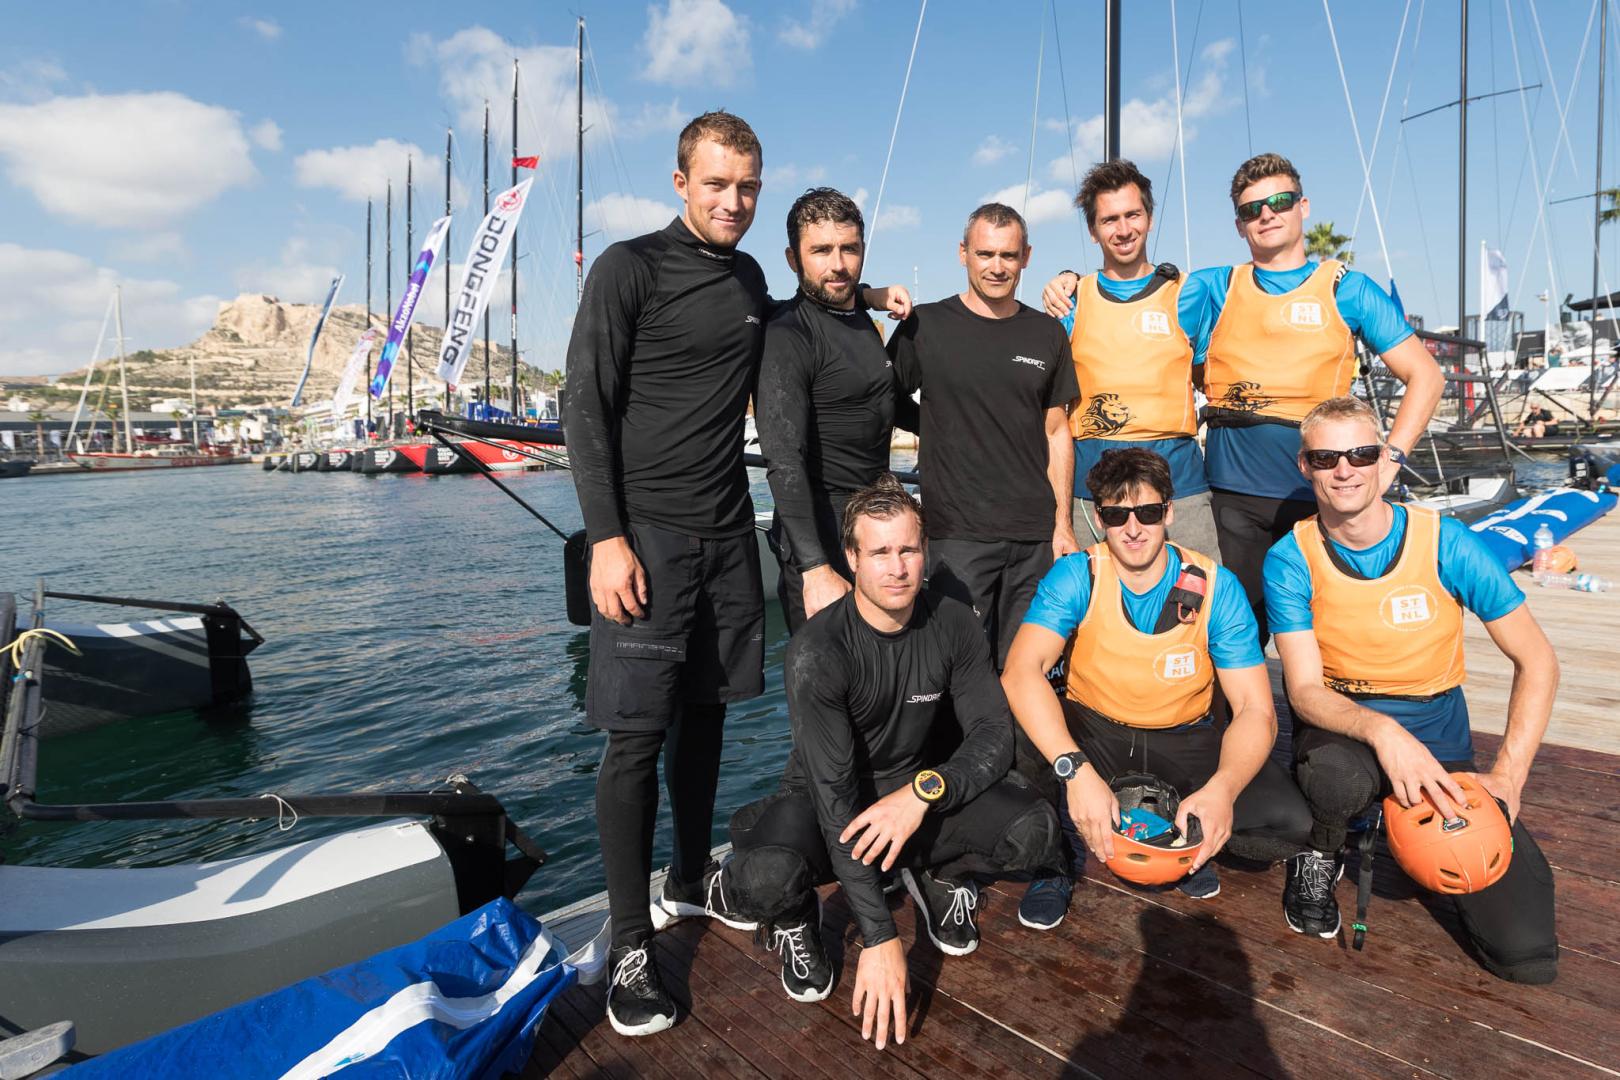 Alicante Match Cup: Spindrift Racing & Sailing Team NL qualify for opening event of 2018 WMRT Season